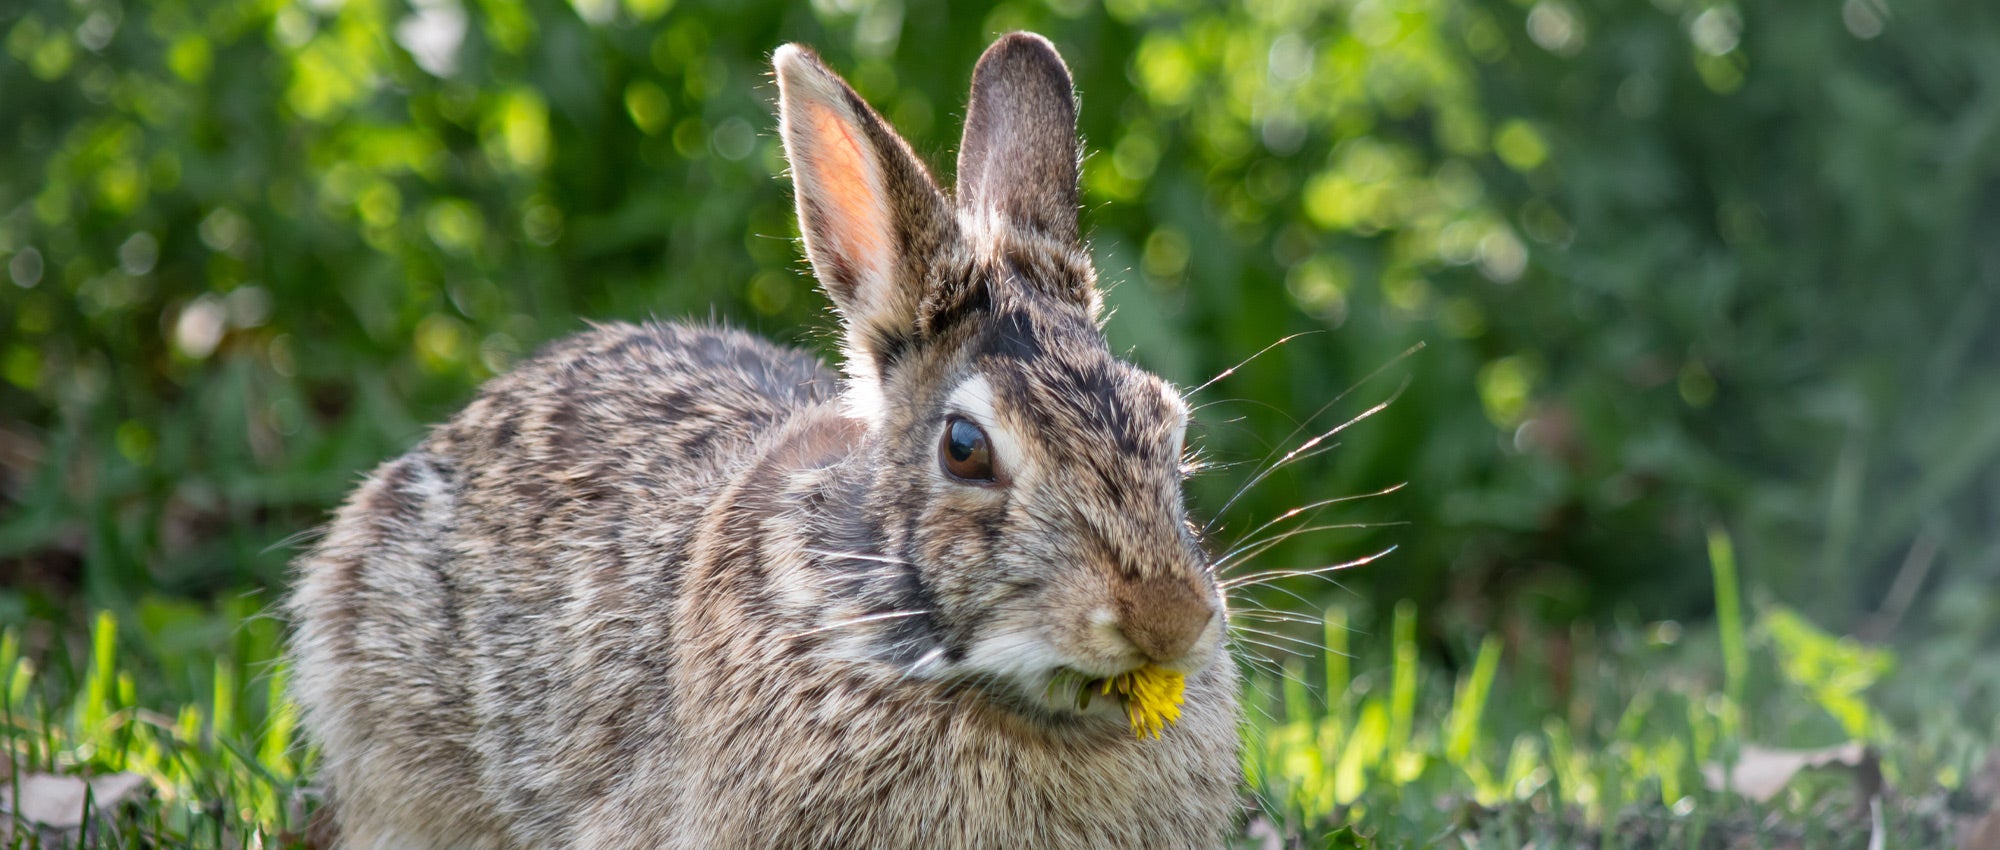 Gardening with rabbits | The Humane Society of the United States